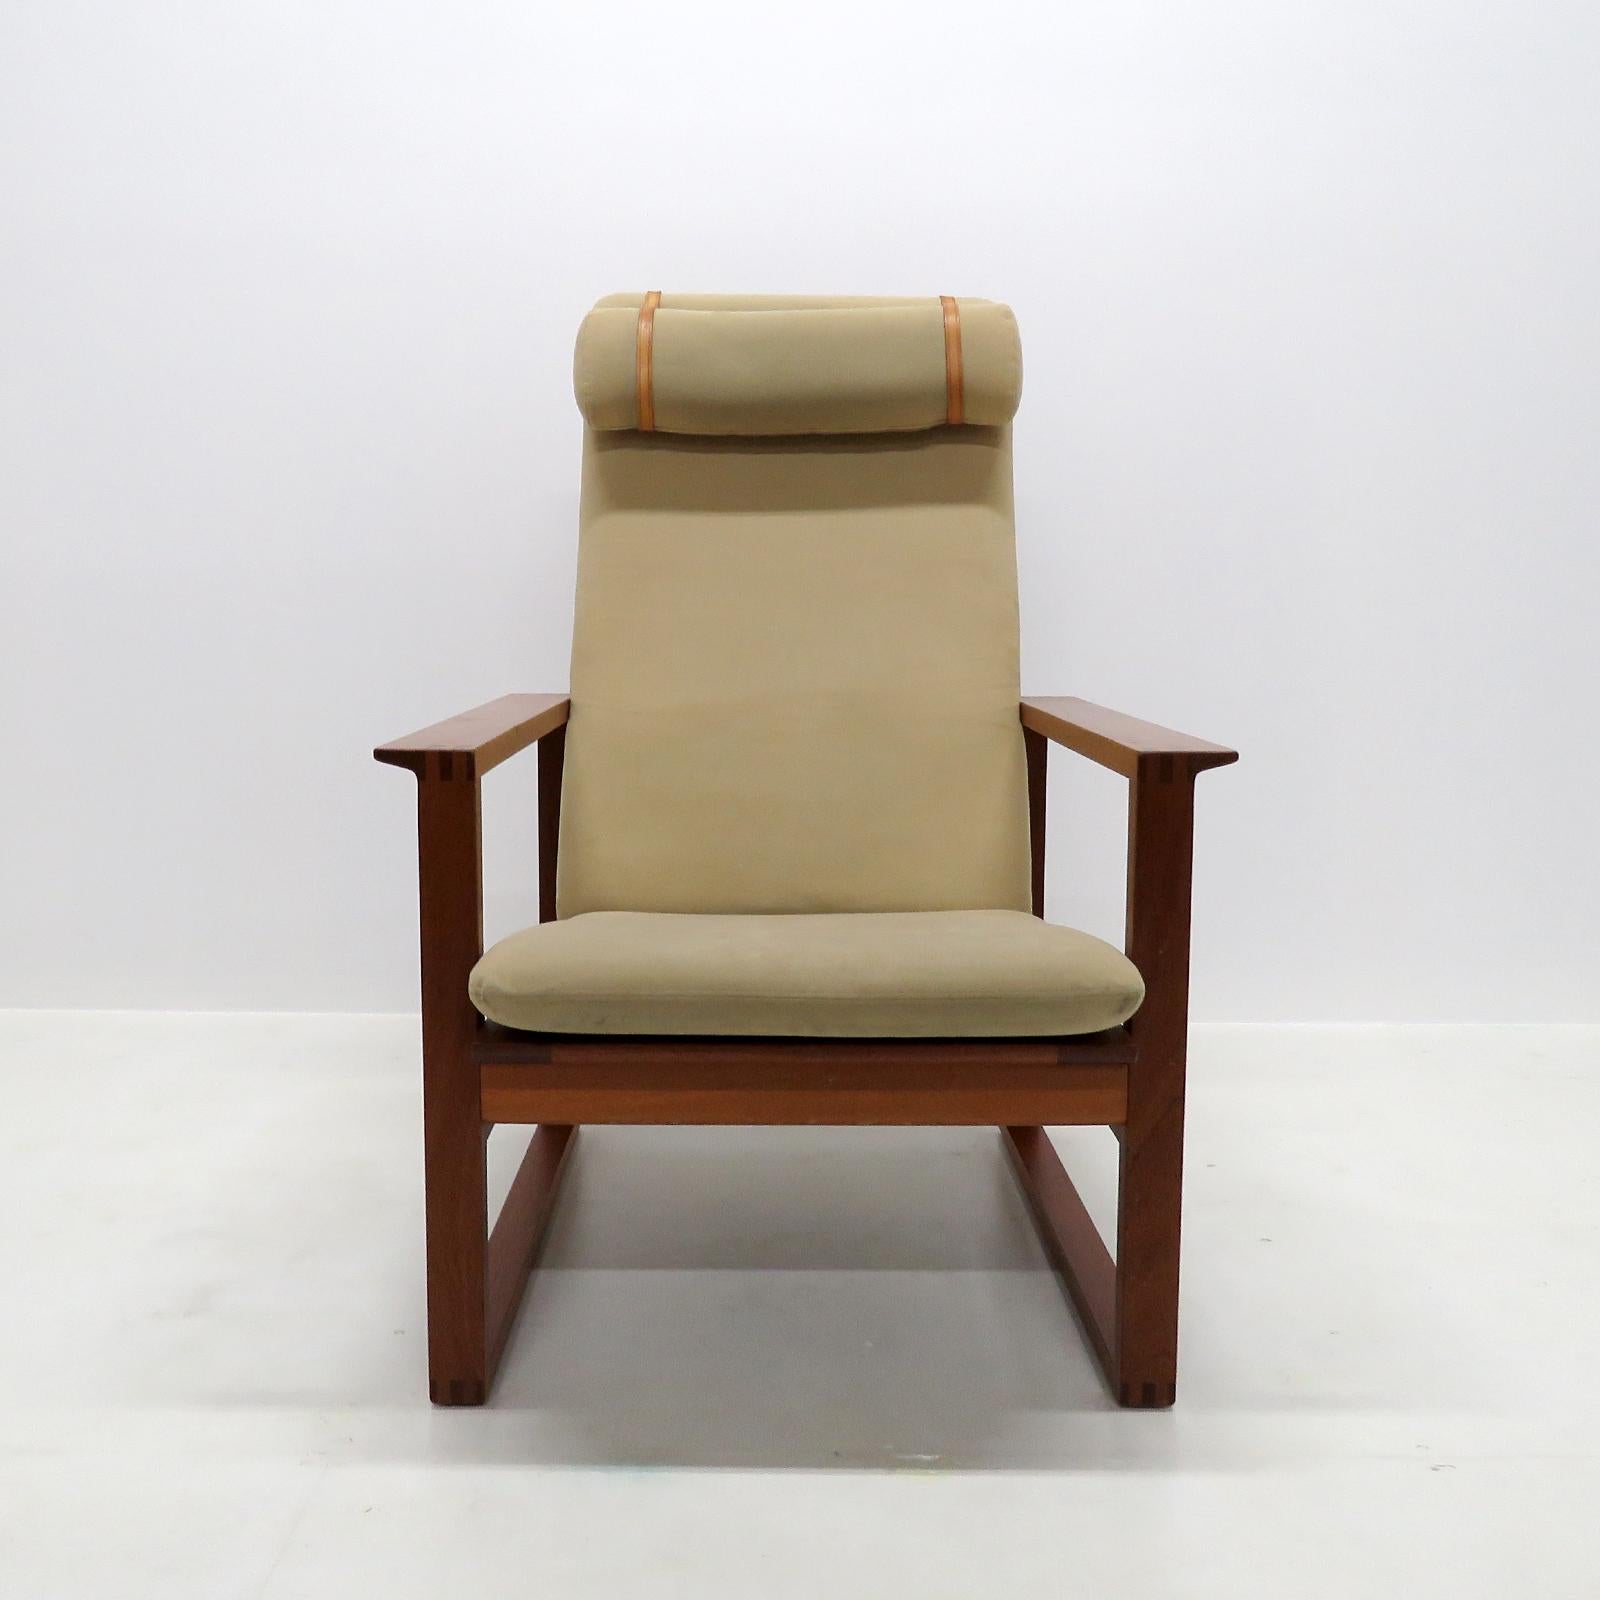 Stunning lounge chair 'BM-2254/ Slædestolen' designed by Børge Mogensen in 1956 and produced by Fredericia Stolefabrik, Sweden, adjustable mahagony frame with original beige alcantara upholstery and leather straps for the seat cushion and headrest. 